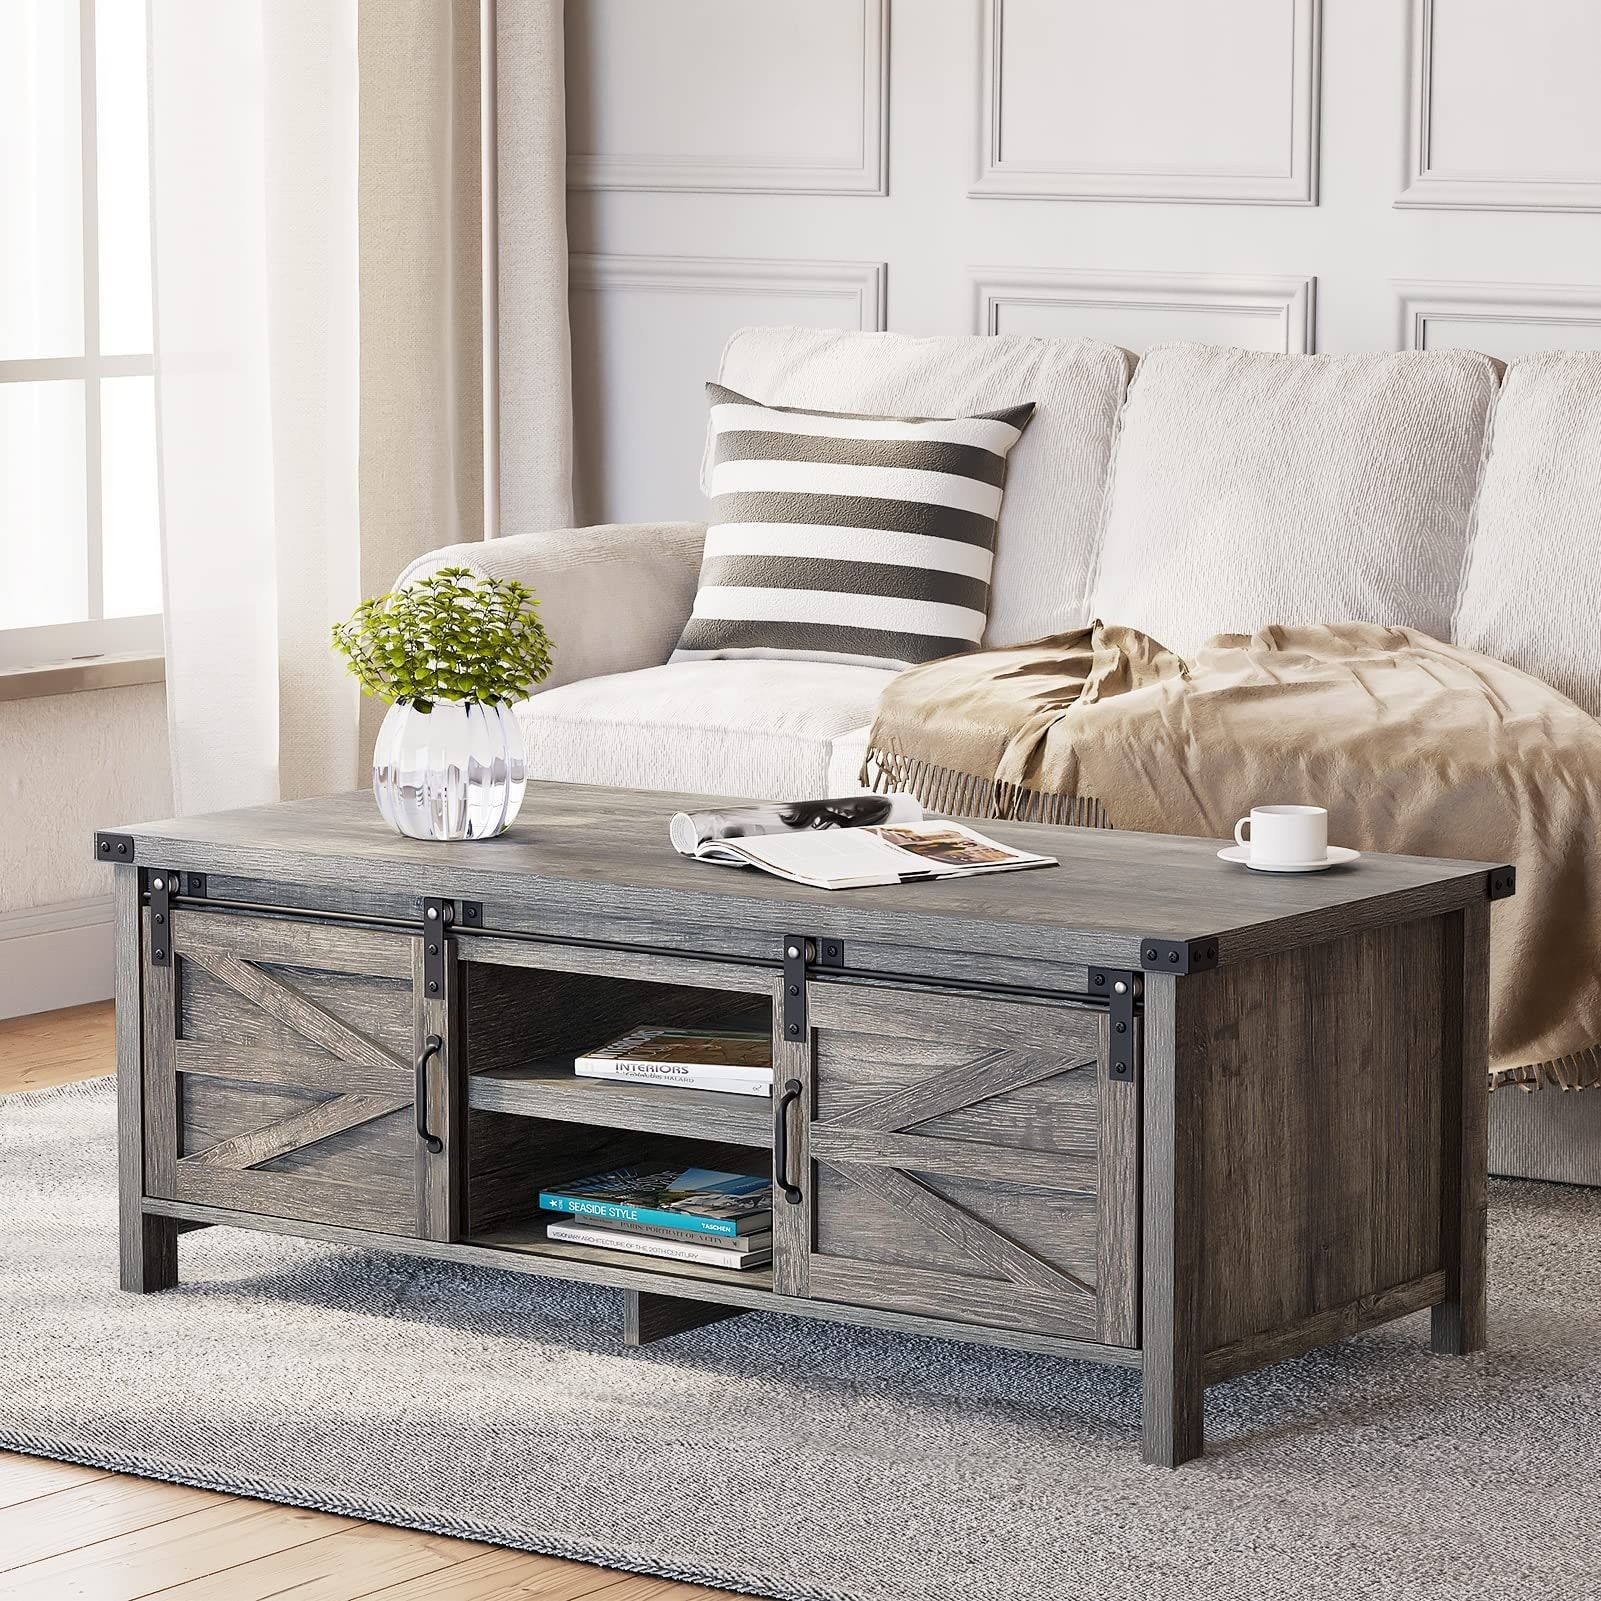 Farmhouse Coffee Table With Sliding Barn Doors & Storage, Grey Rustic  Wooden Center Rectangular Tables – Bed Bath & Beyond – 37841722 Within Coffee Tables With Storage And Barn Doors (View 2 of 15)